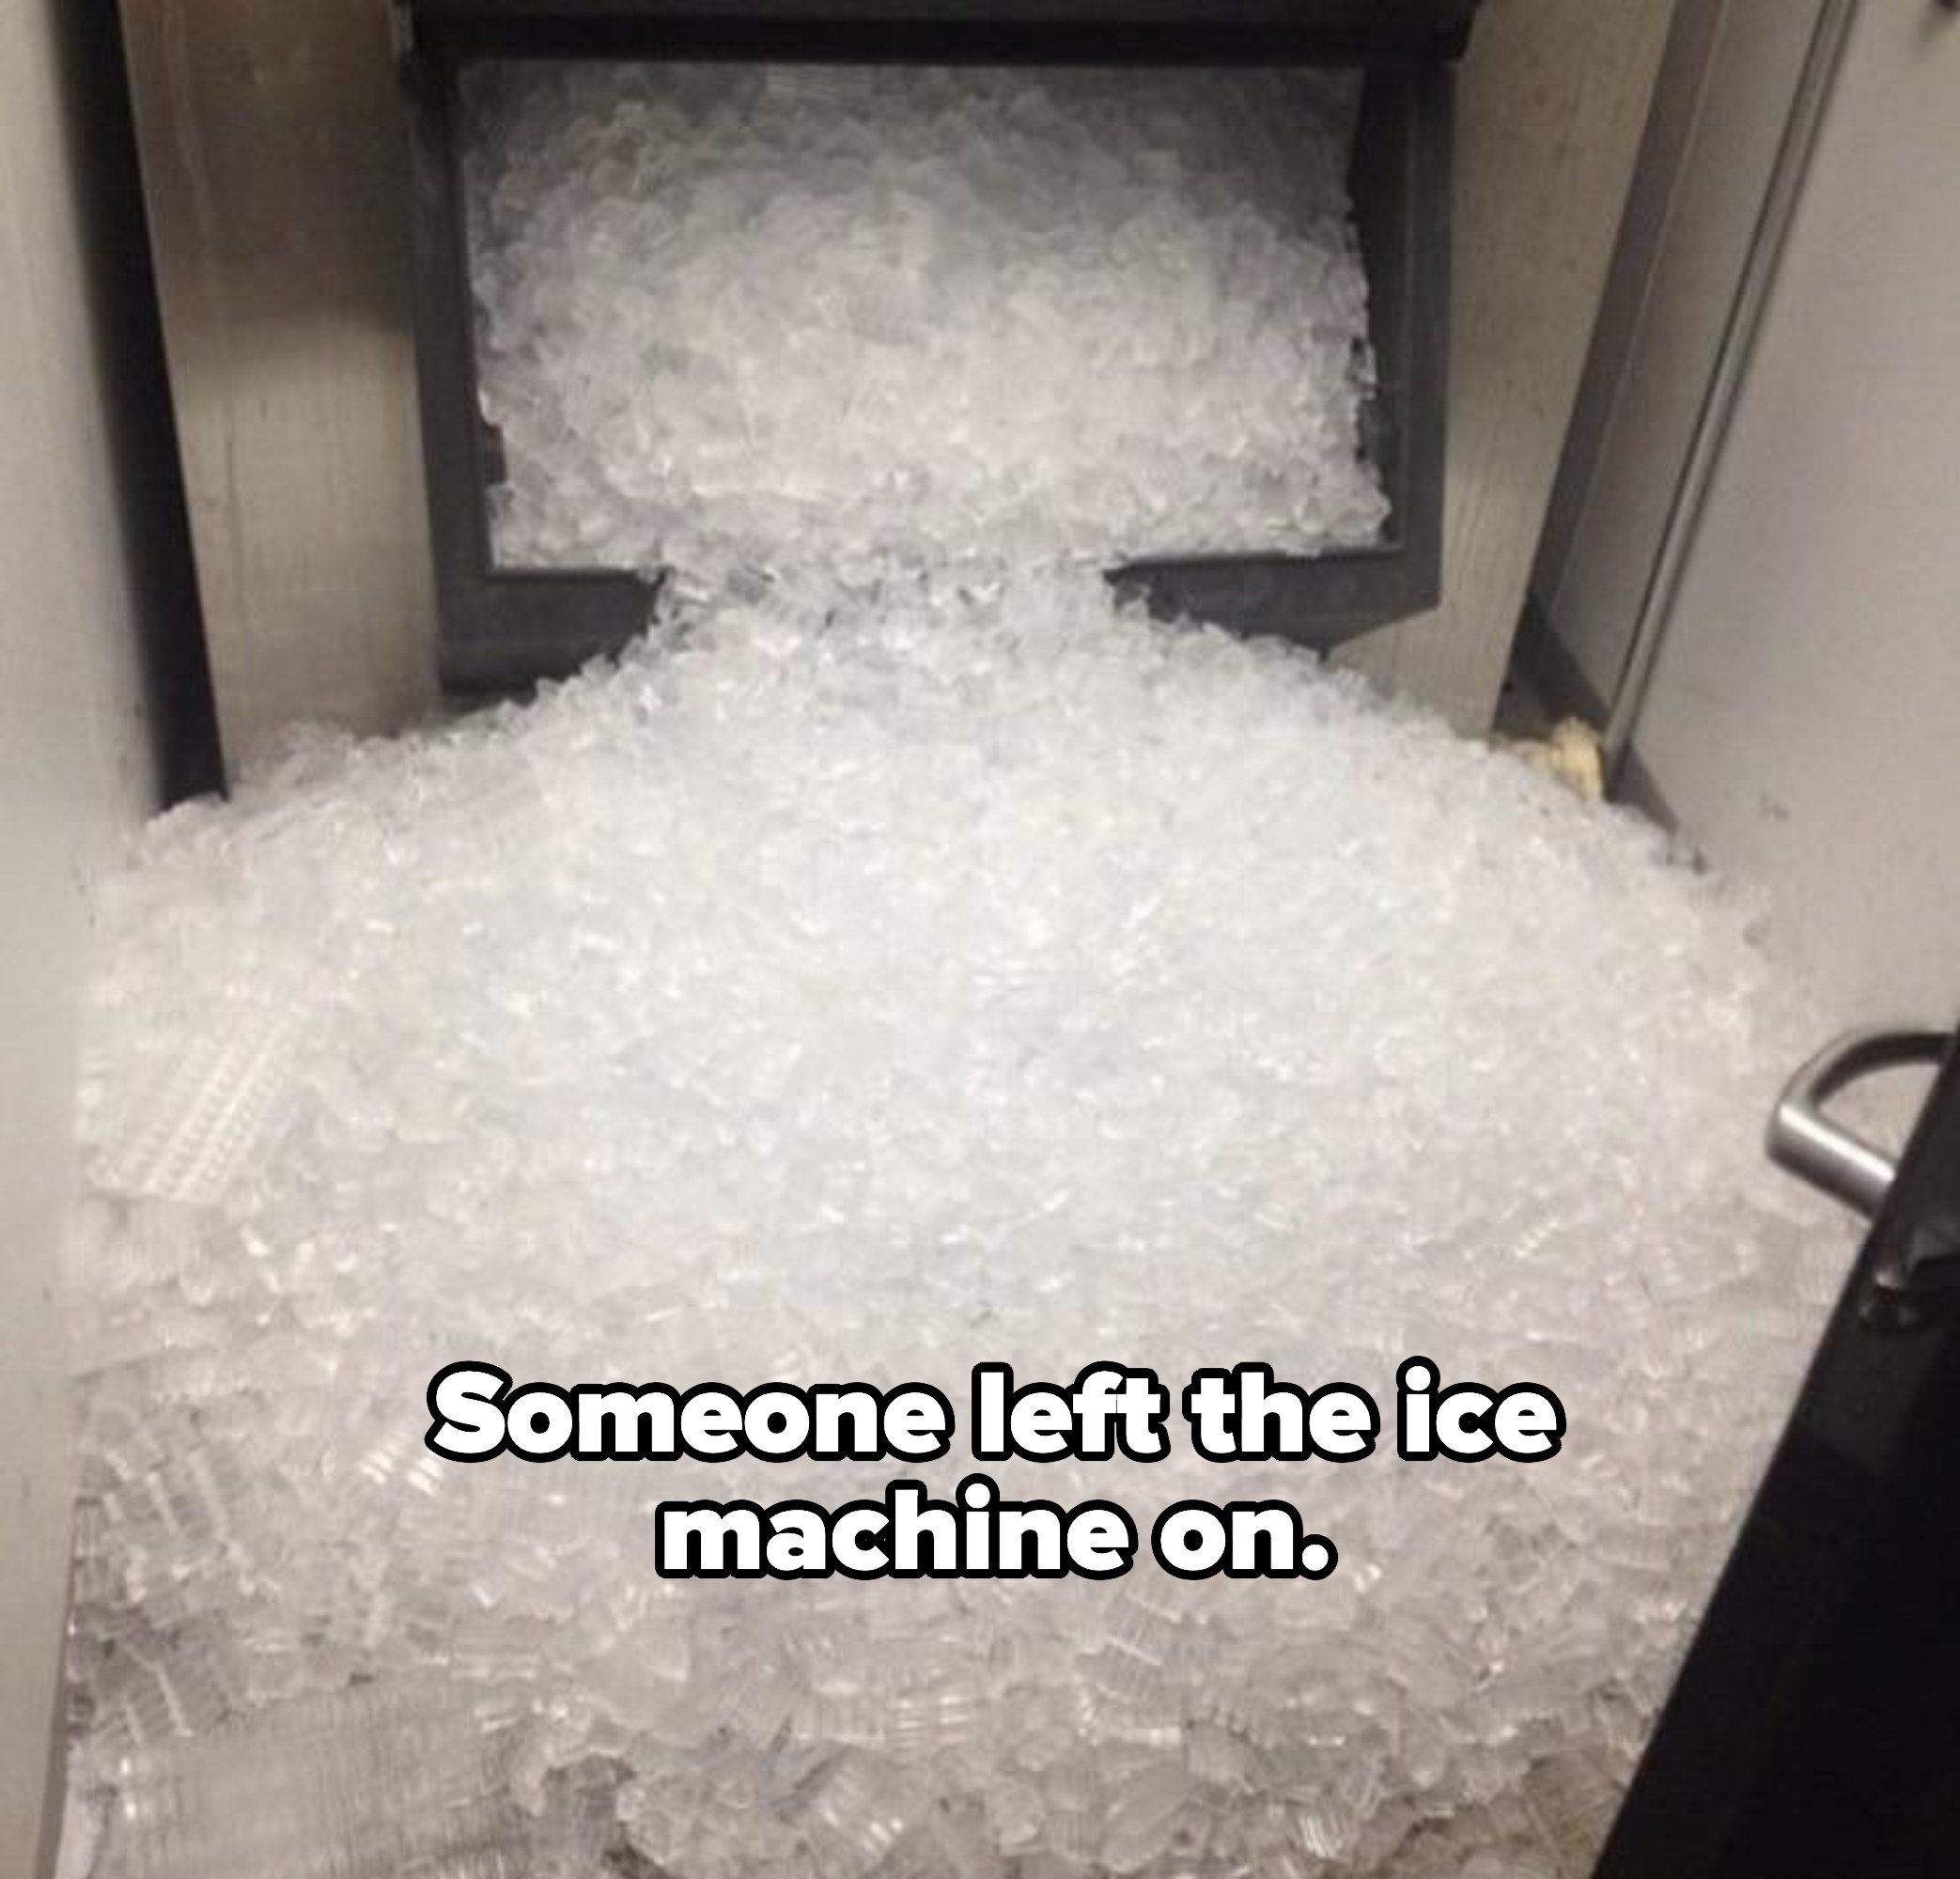 ice machine left on creating a ton of ice spilling into a room